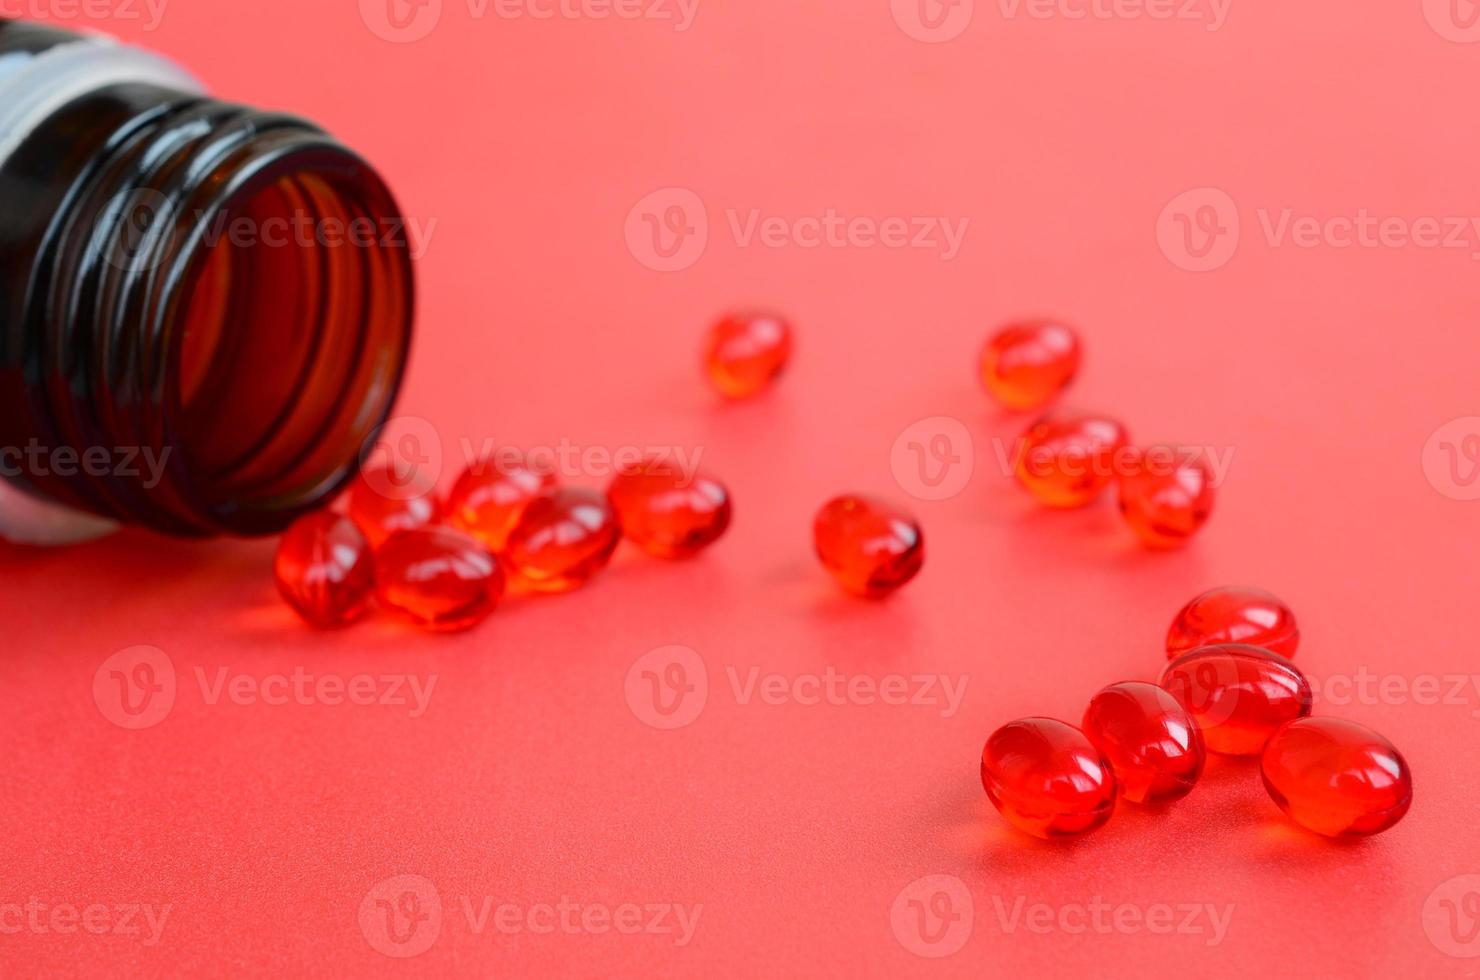 A lot of transparent red tablets were scattered from a small glass brown jar on a red surface photo